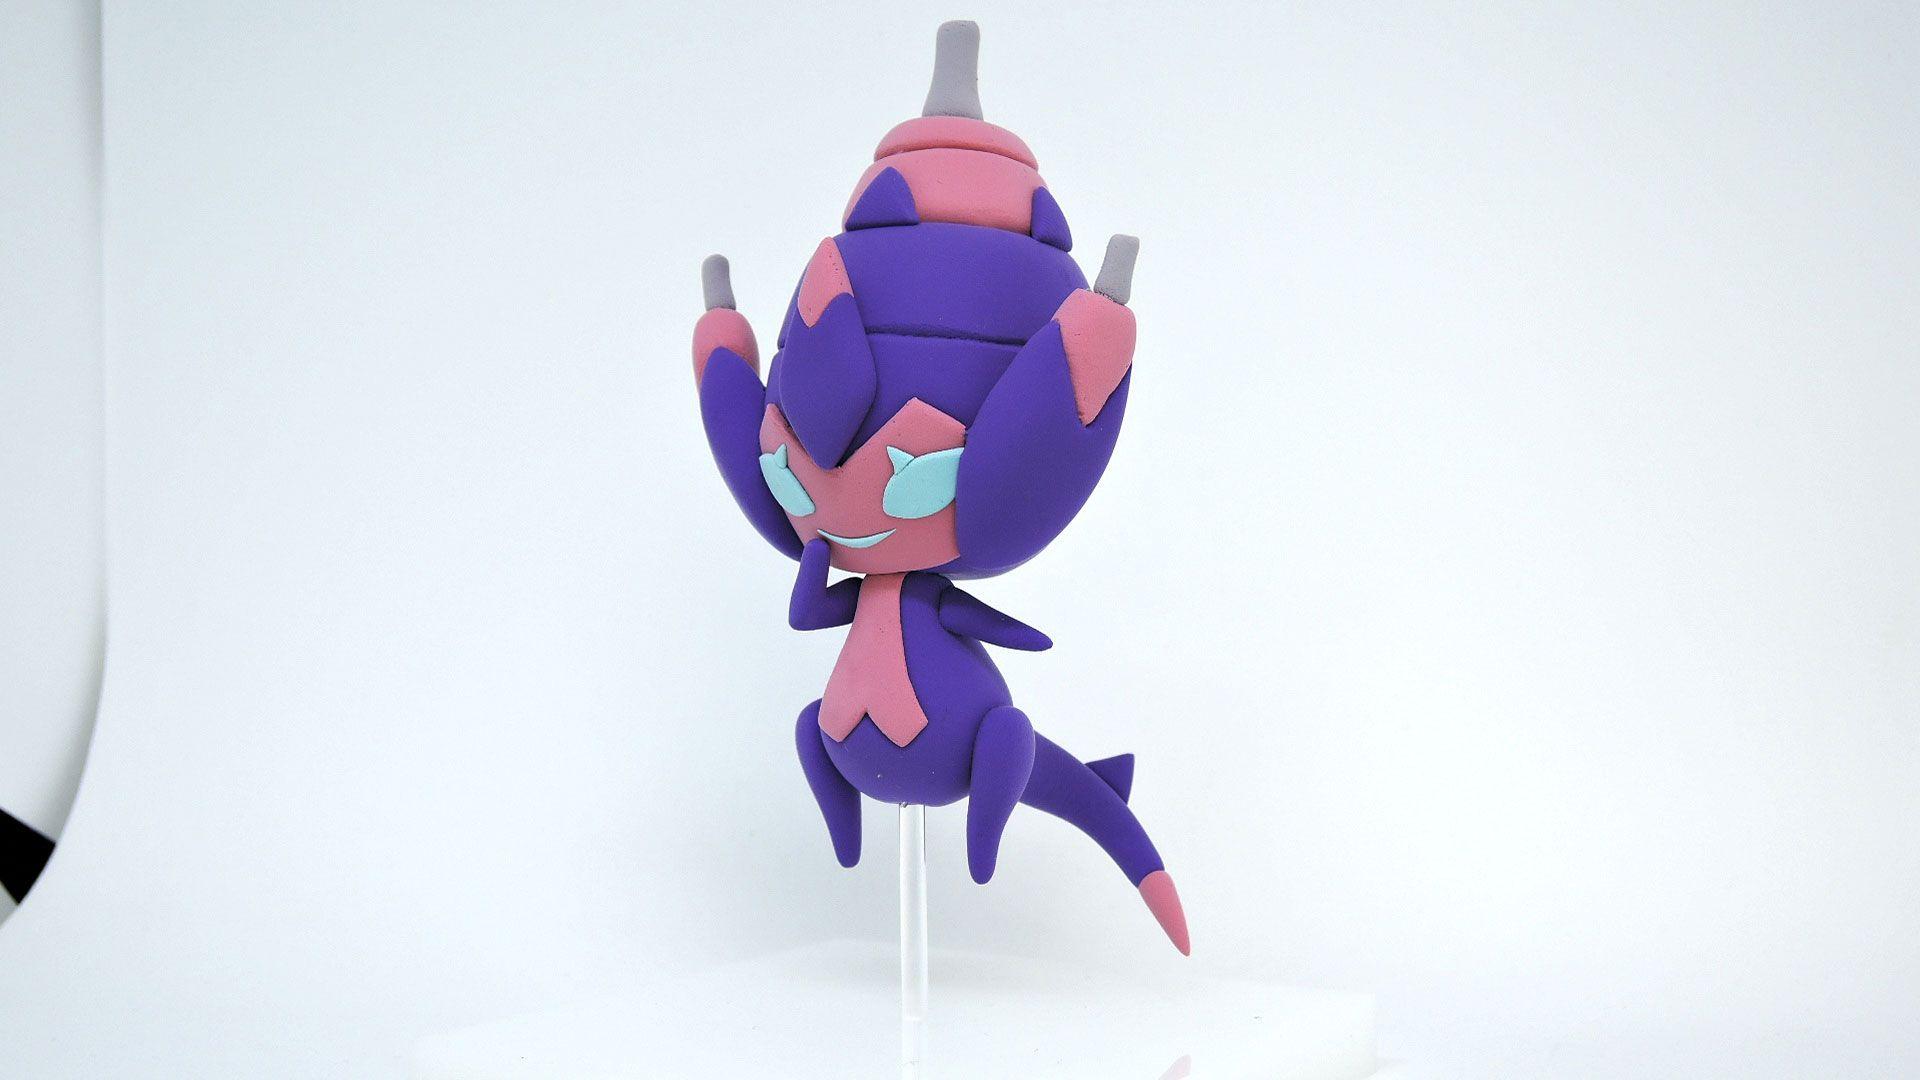 I sculpted Ultra beast Poipole